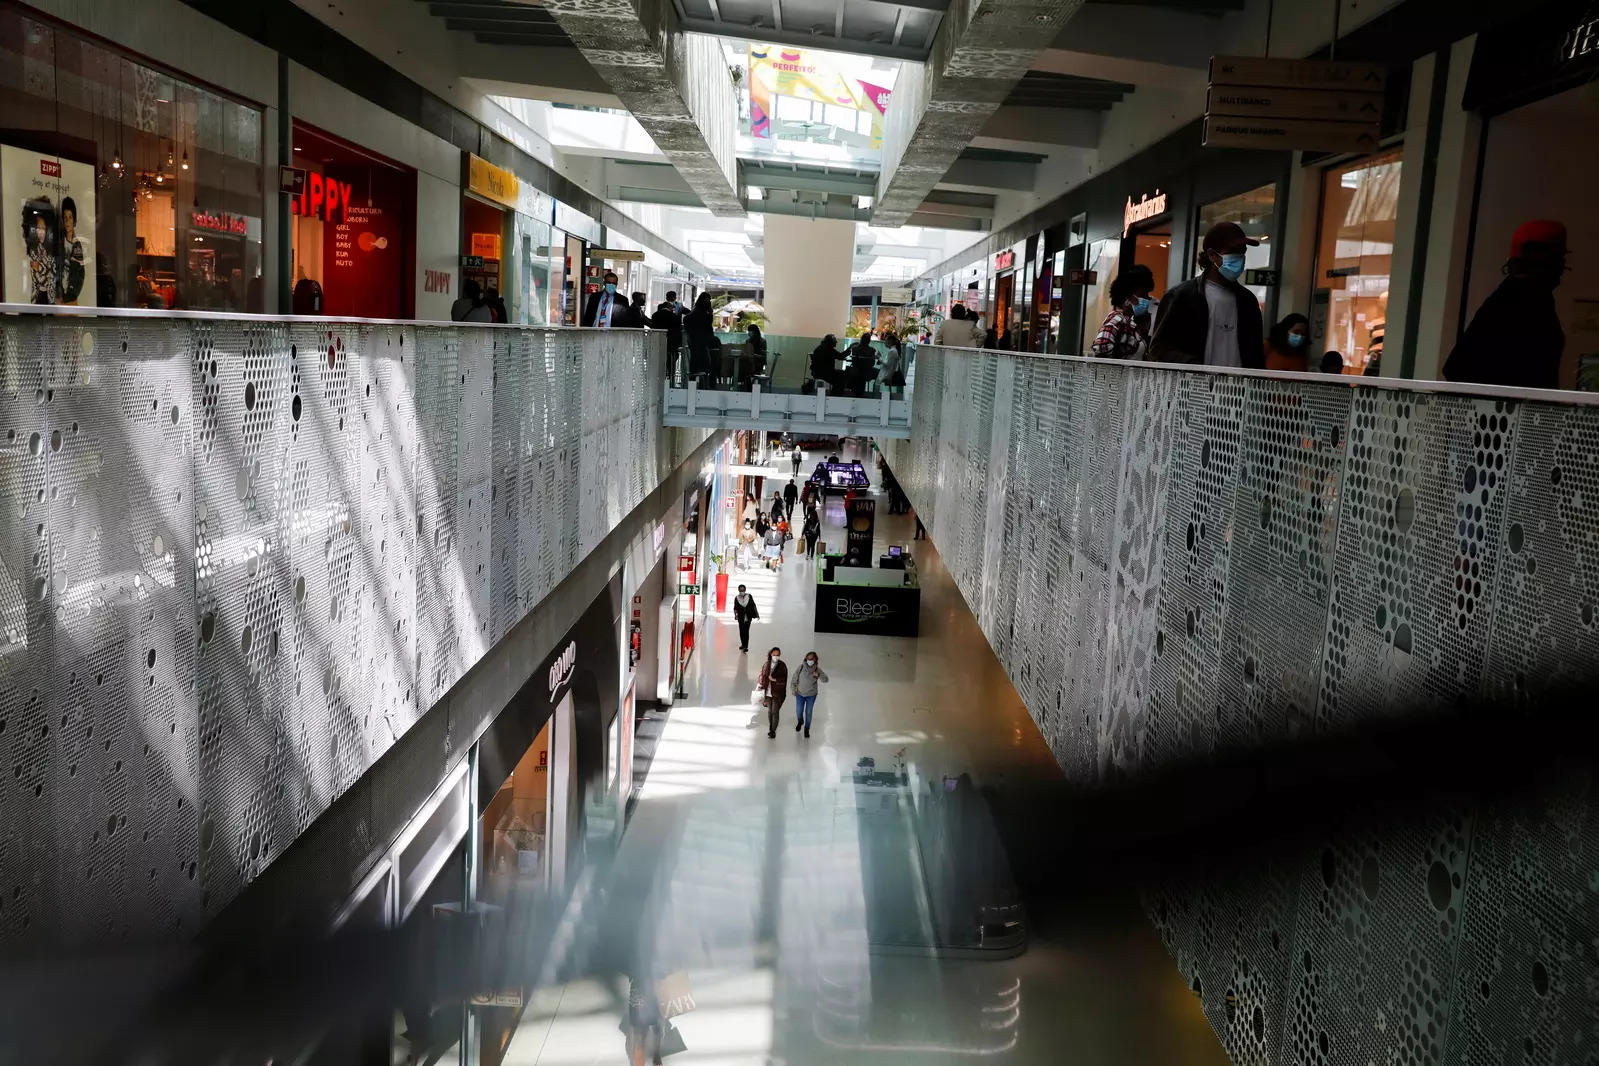 Pandemic further impacts malls that already had uncertain future